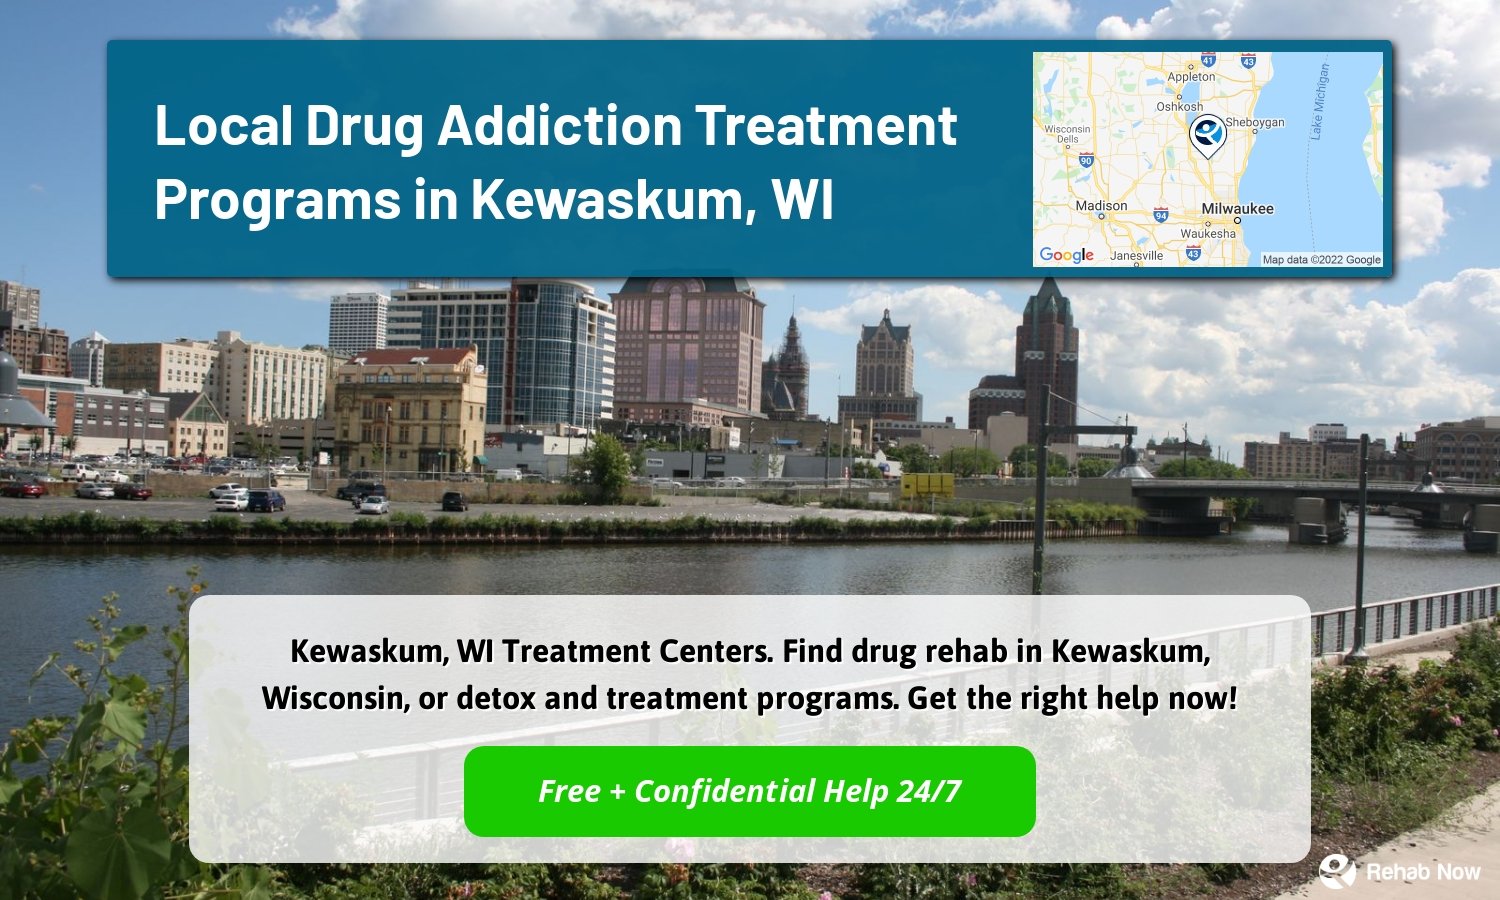 Kewaskum, WI Treatment Centers. Find drug rehab in Kewaskum, Wisconsin, or detox and treatment programs. Get the right help now!